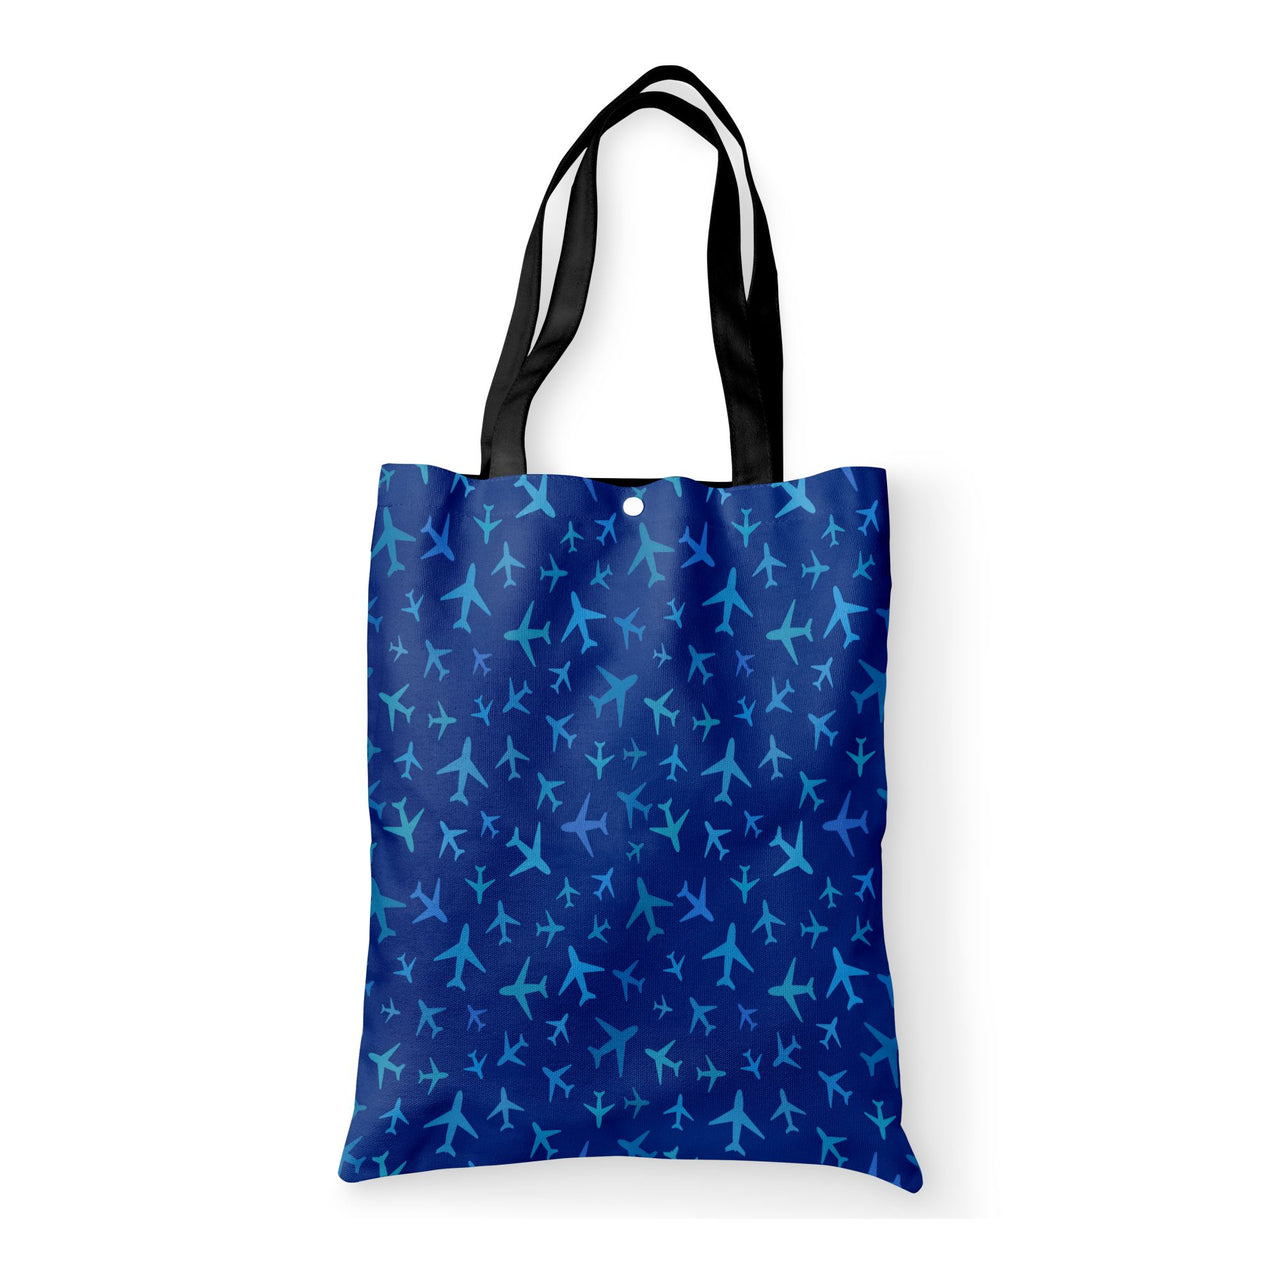 Many Airplanes Blue Designed Tote Bags